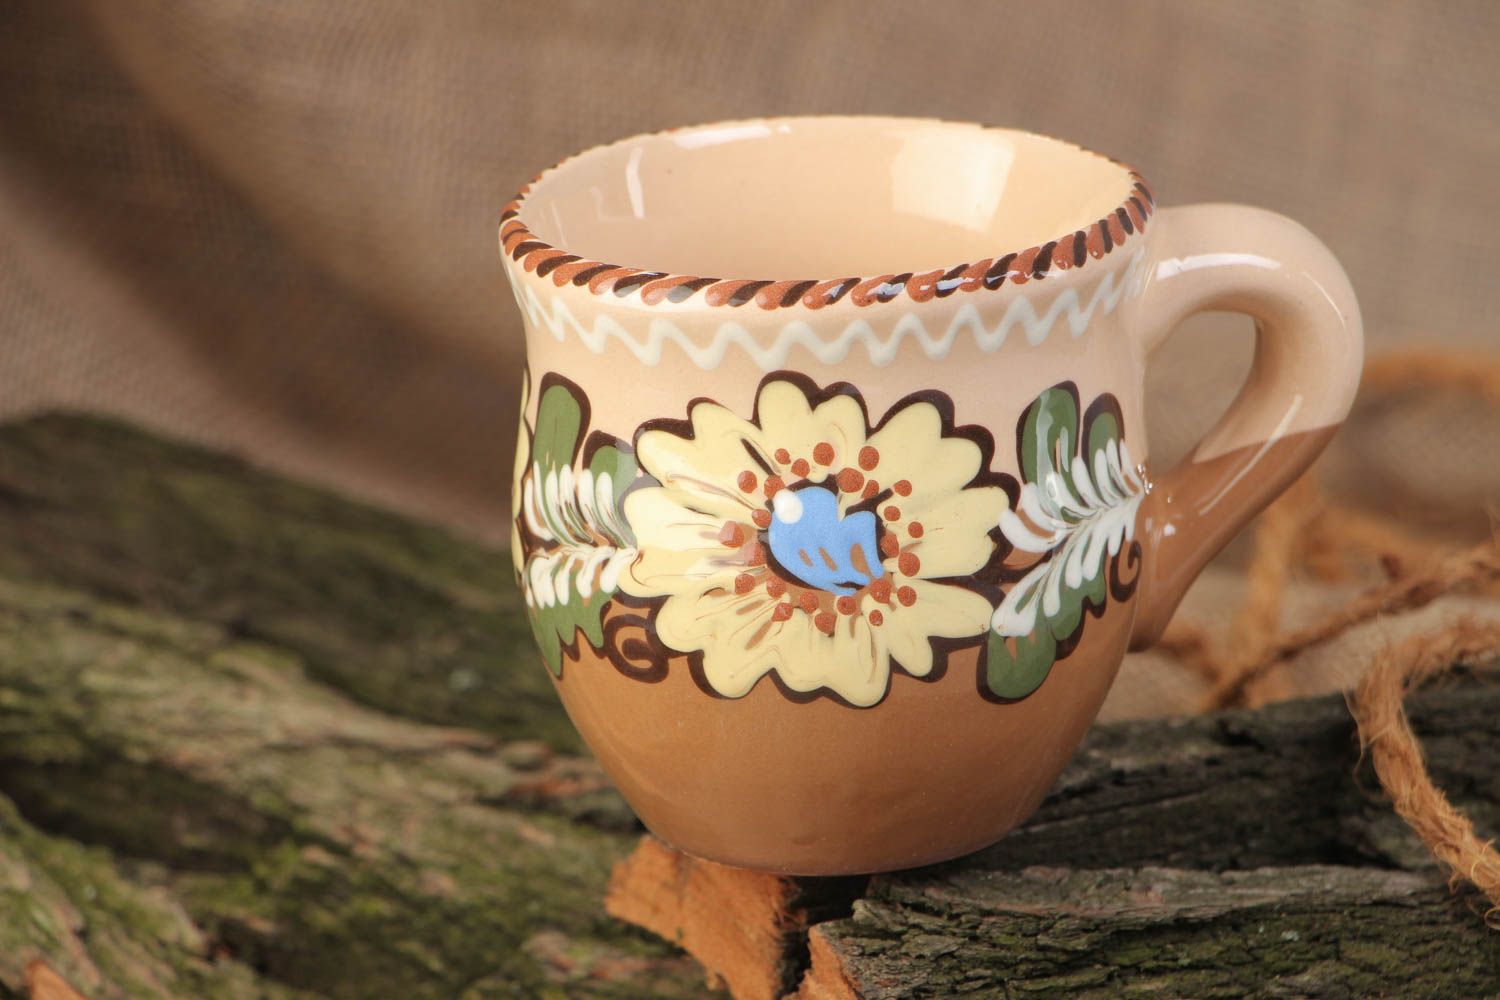 10 oz clay glazed cup with handle and floral design in brown, beige, and blue color photo 1